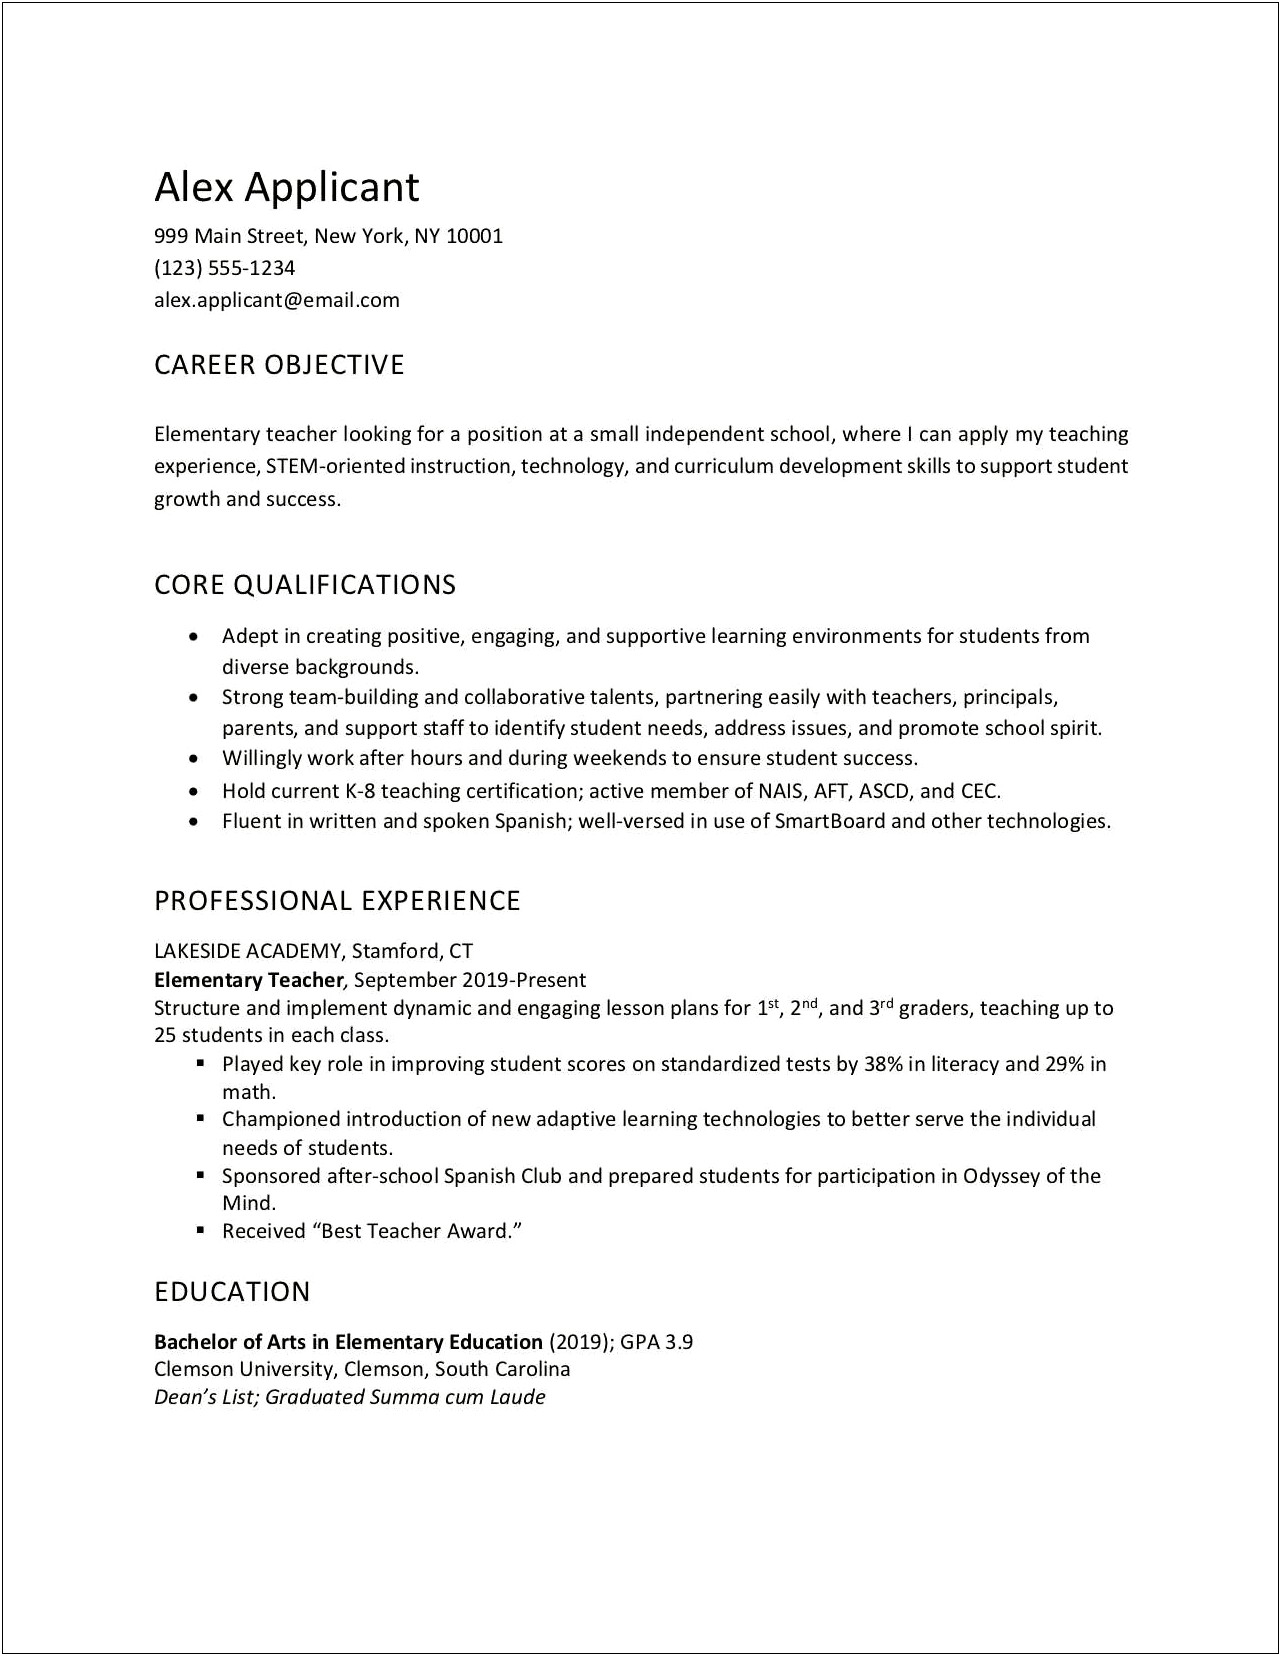 Basic Resume Objective Statement Examples